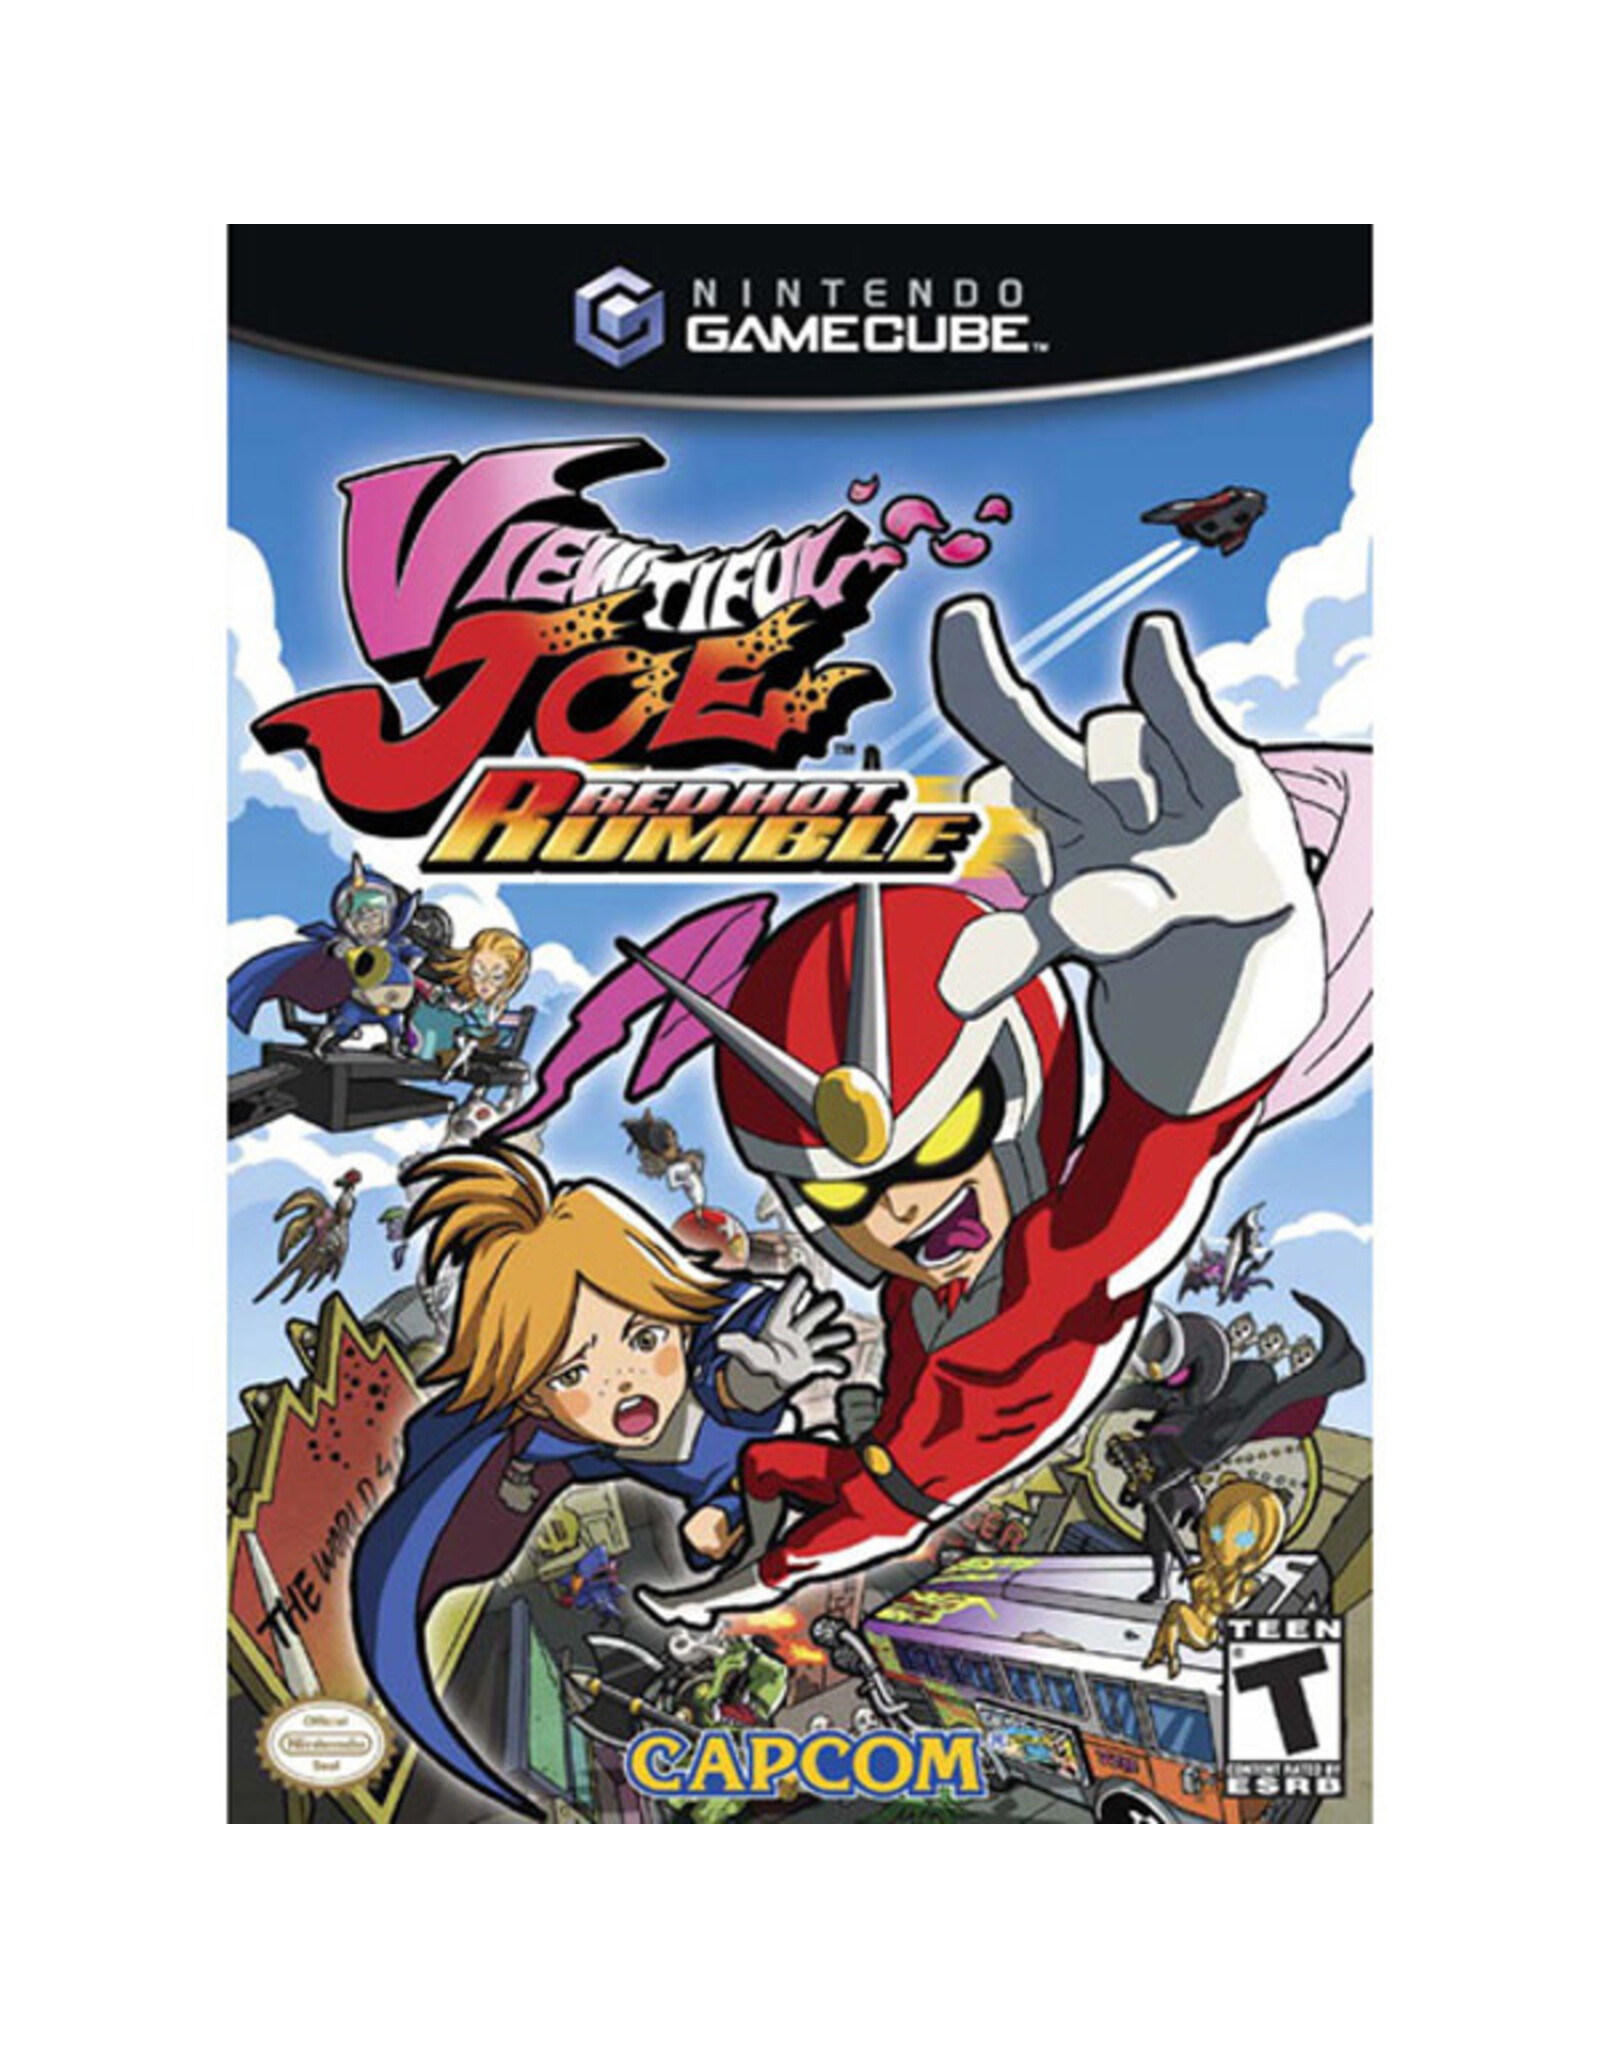 Used Game - Nintendo Gamecube - Viewtiful Joe Red Hot Rumble (Disk Only)